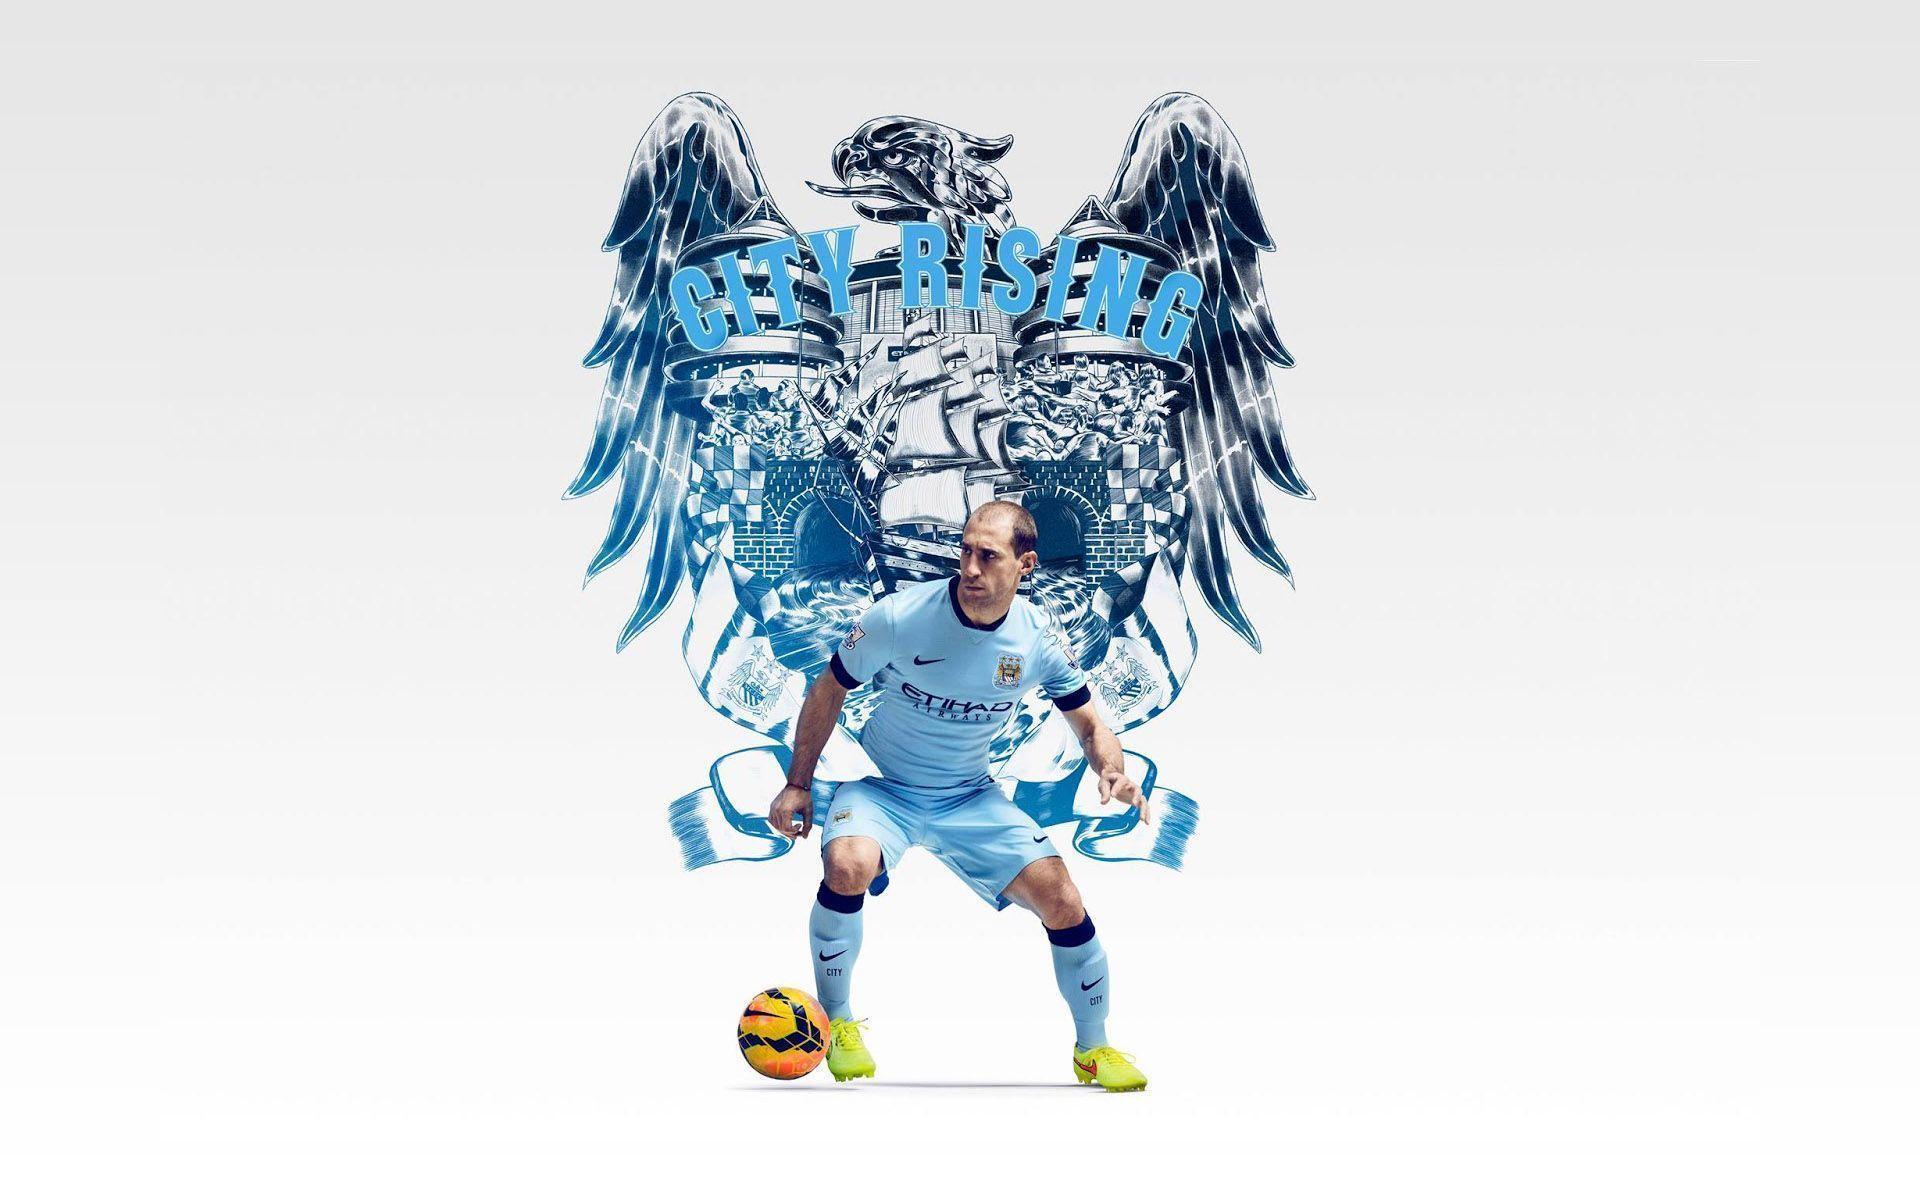 Wallpaper Tagged Manchester City Wide or HD. WallWideHD